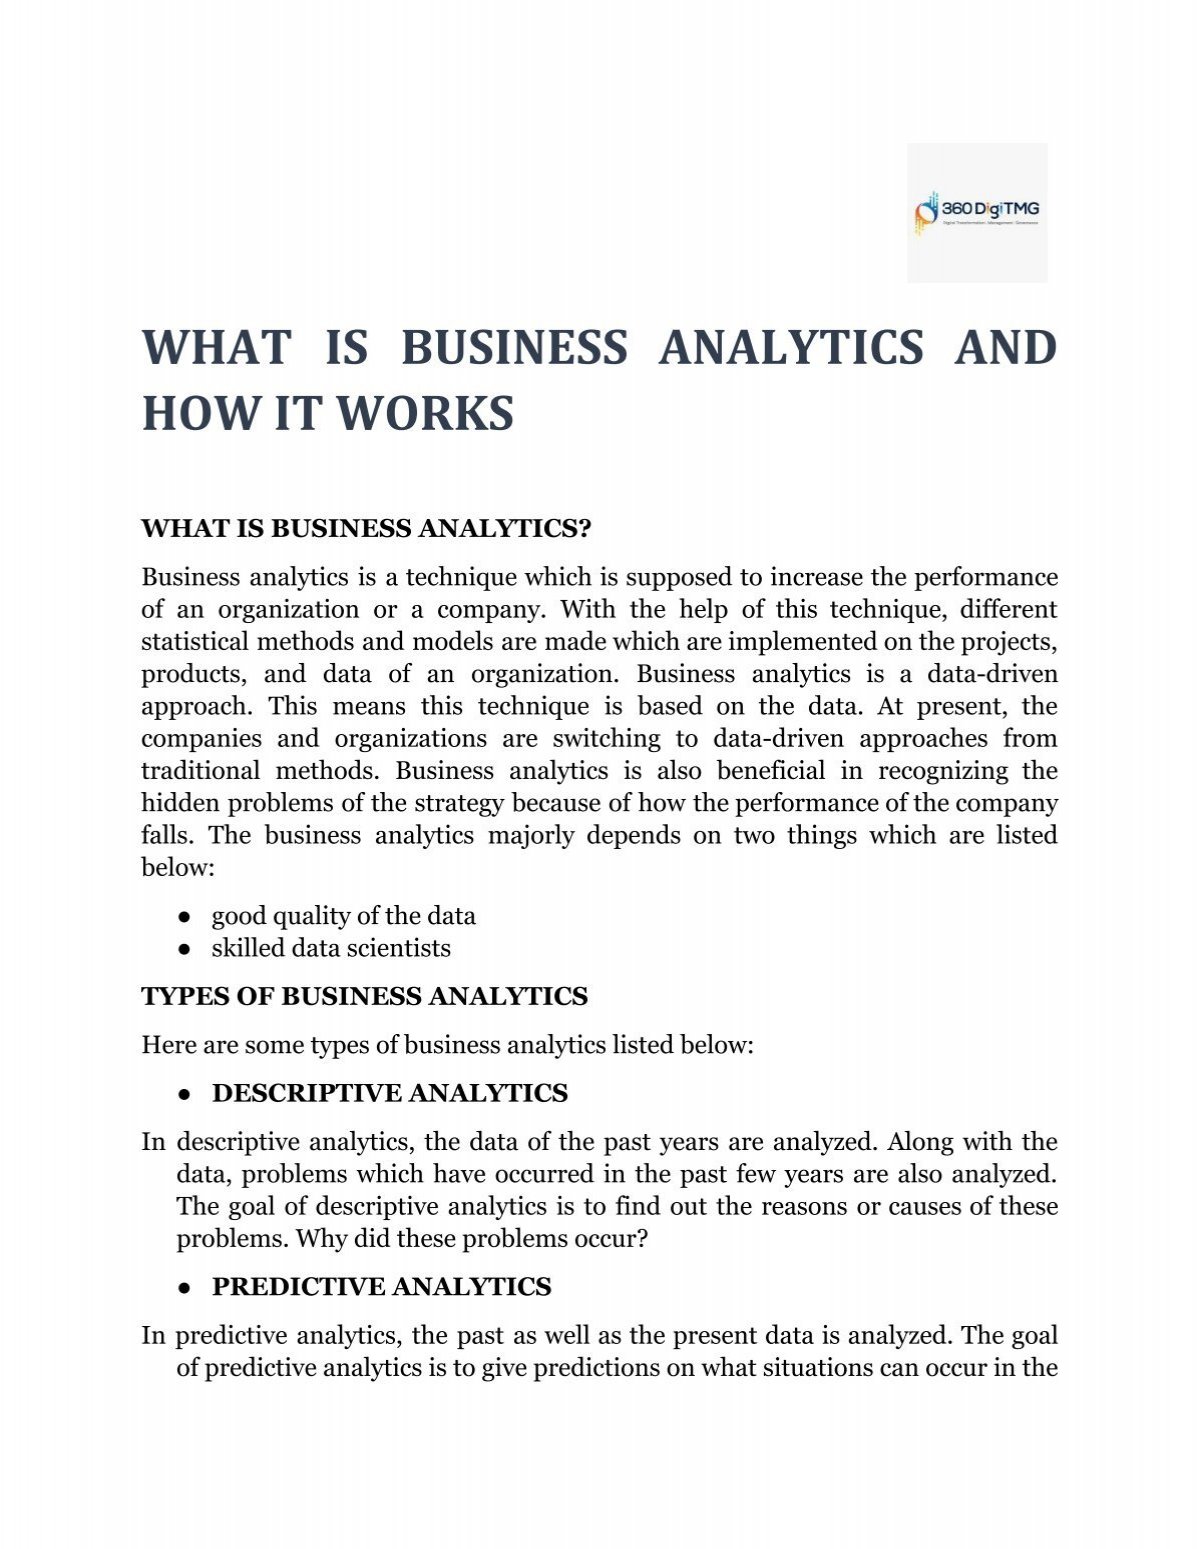 thesis on business analytics